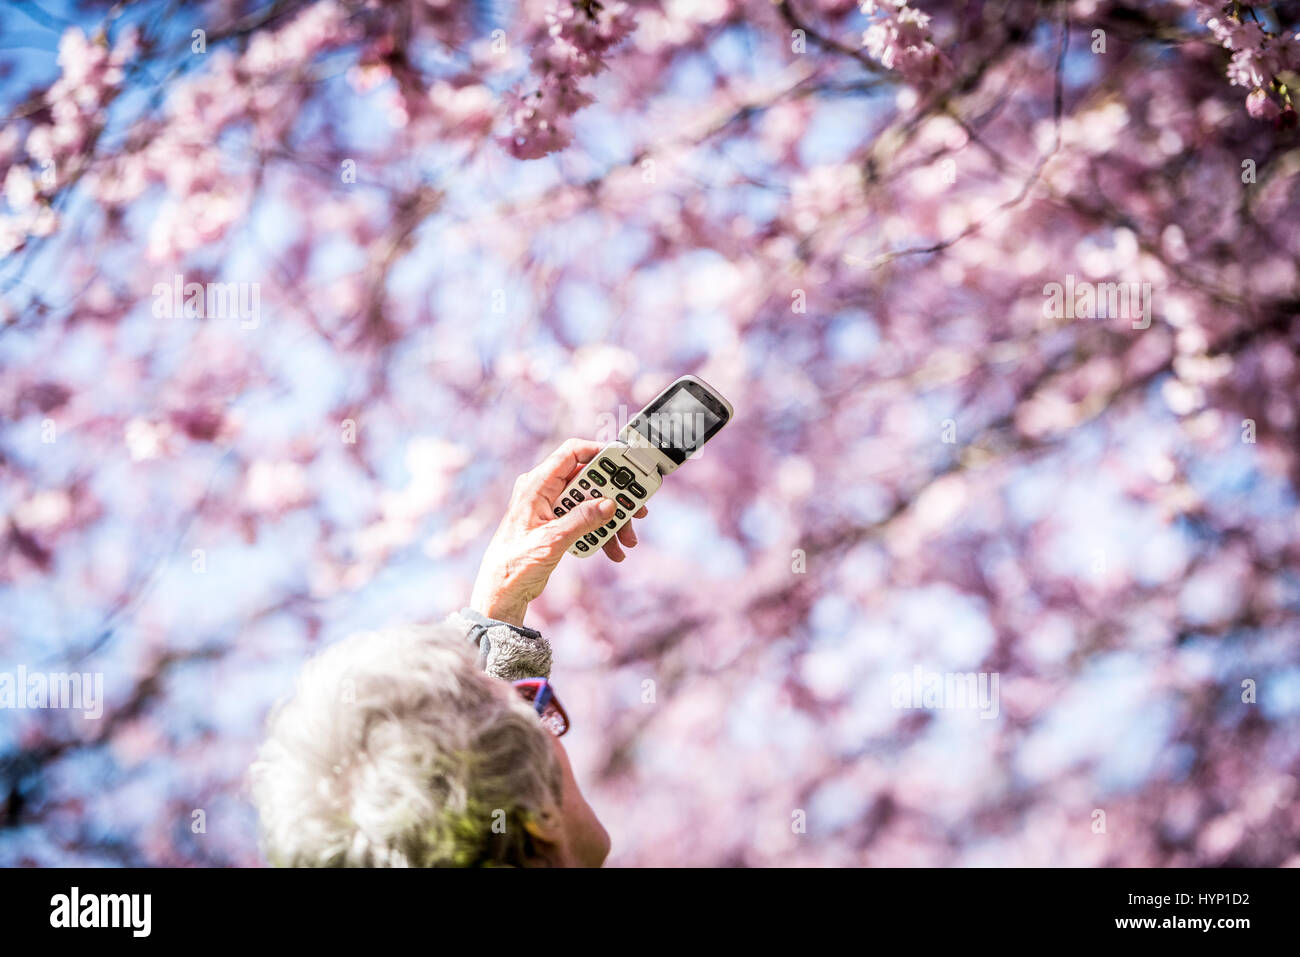 Copenhagen, Denmark. 6th April, 2017.  Spring has well and truly arrived in the Nordvest district of Copenhagen, Denmark. On Thursday morning, hundreds of people flocked to the grounds of Bispebjerg Cemetery to admire and photograph the impressive Cherry Blossom trees that have recently come in to bloom.    Credit: Matthew James Harrison/Alamy Live News Stock Photo